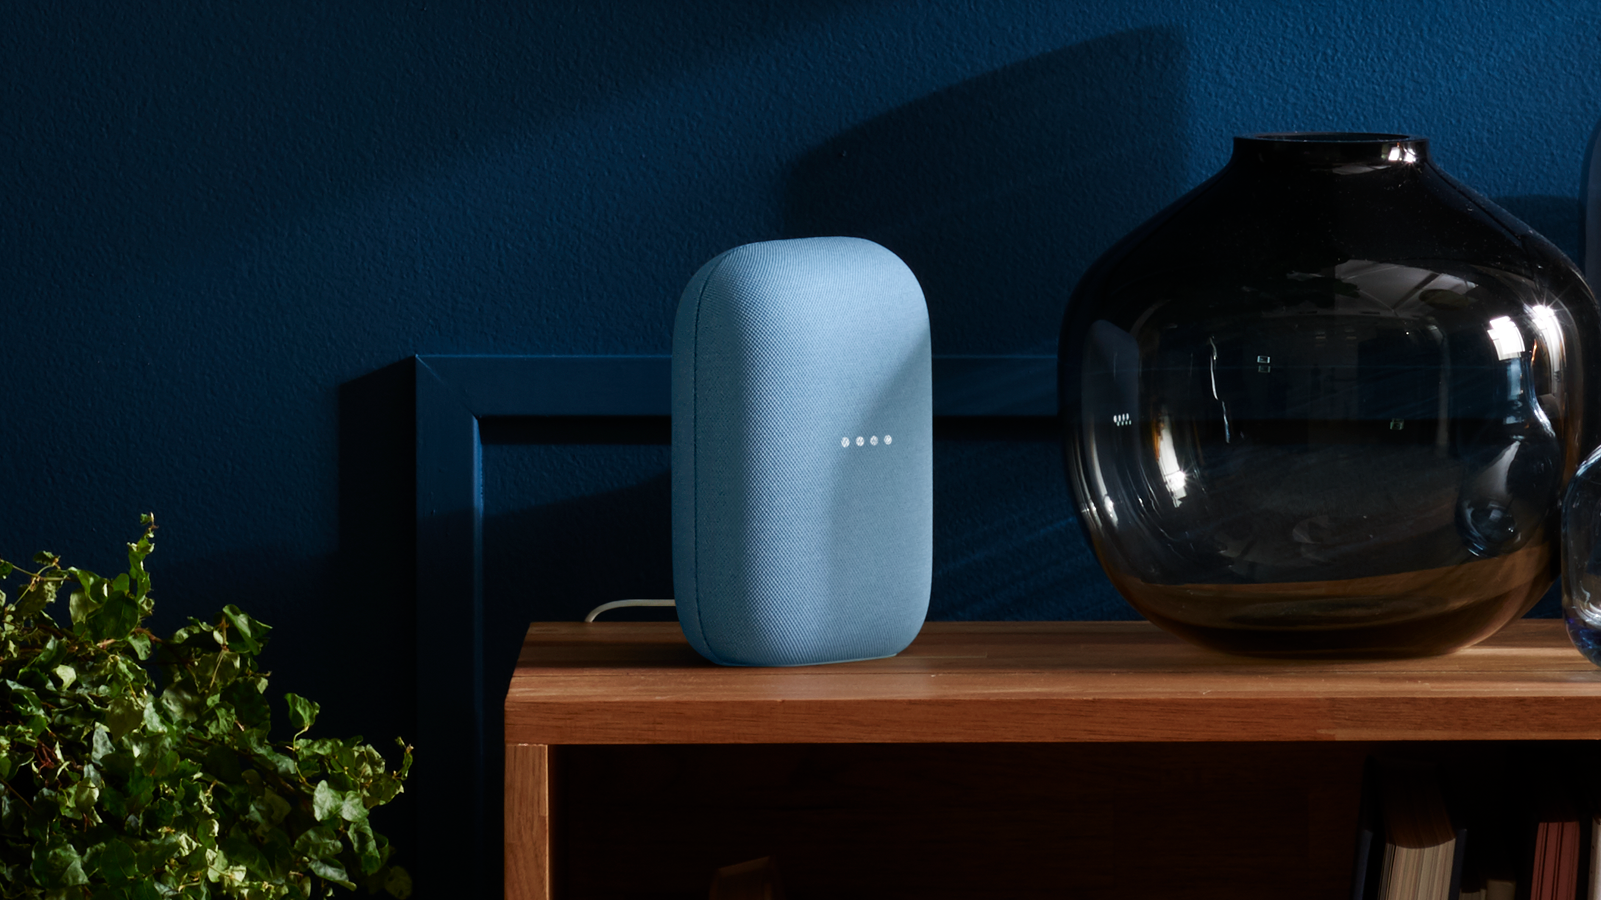 New Google Nest speaker tipped to launch end of August for around $100-120